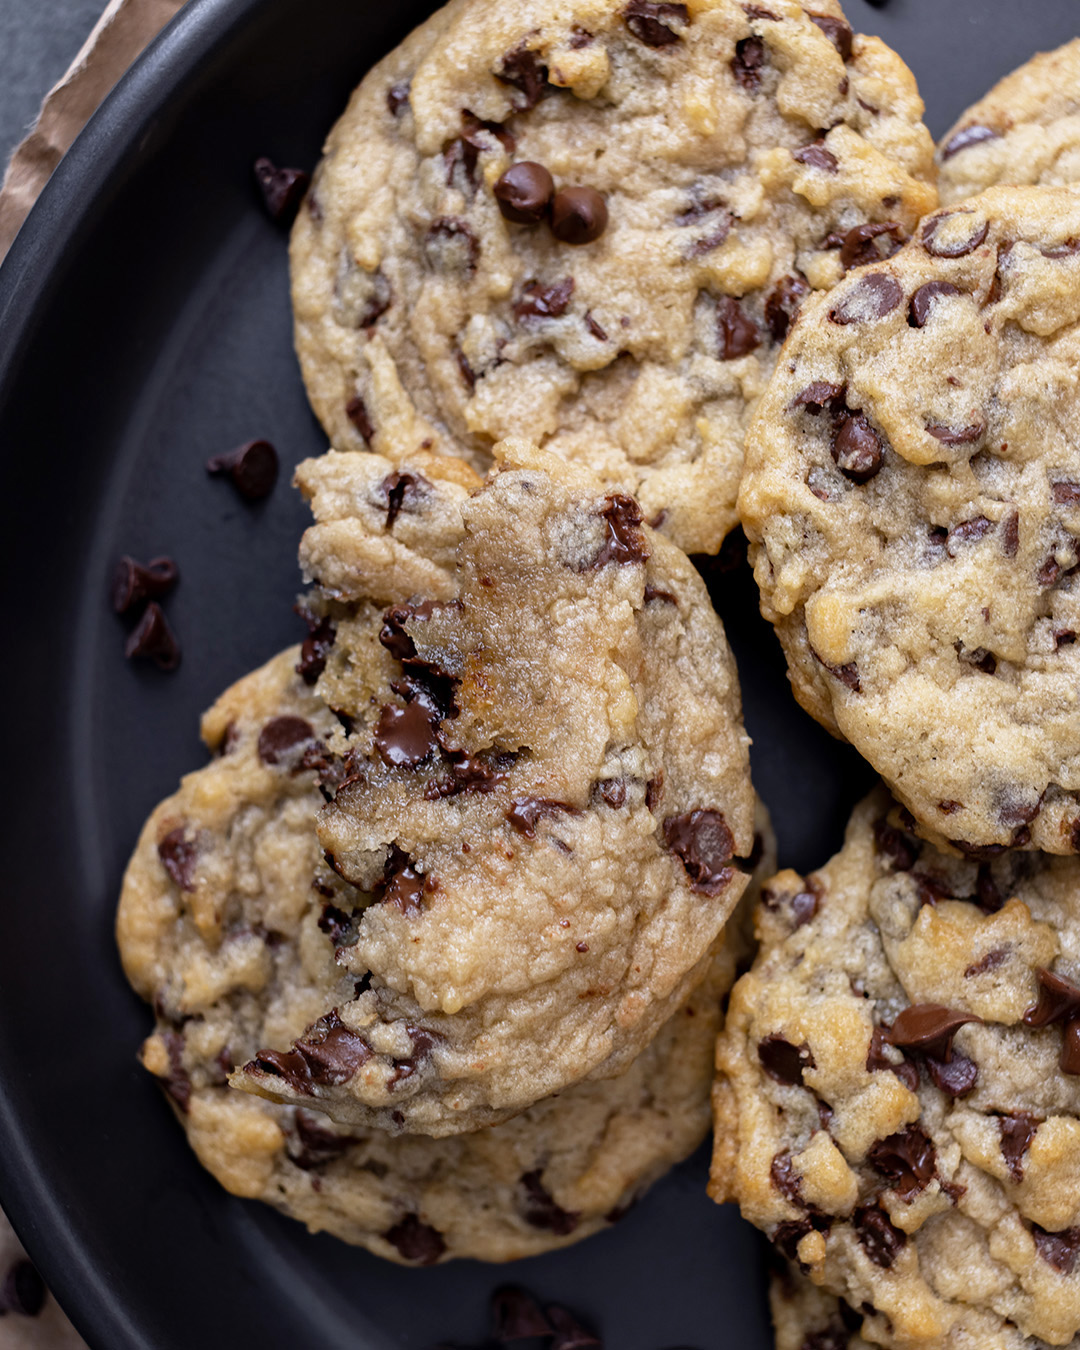 These cookies have had multiple rave reviews from all the neighborhood kids. :) Here's the recipe for absolutely perfect, soft and chewy plant-based chocolate chip cookies.